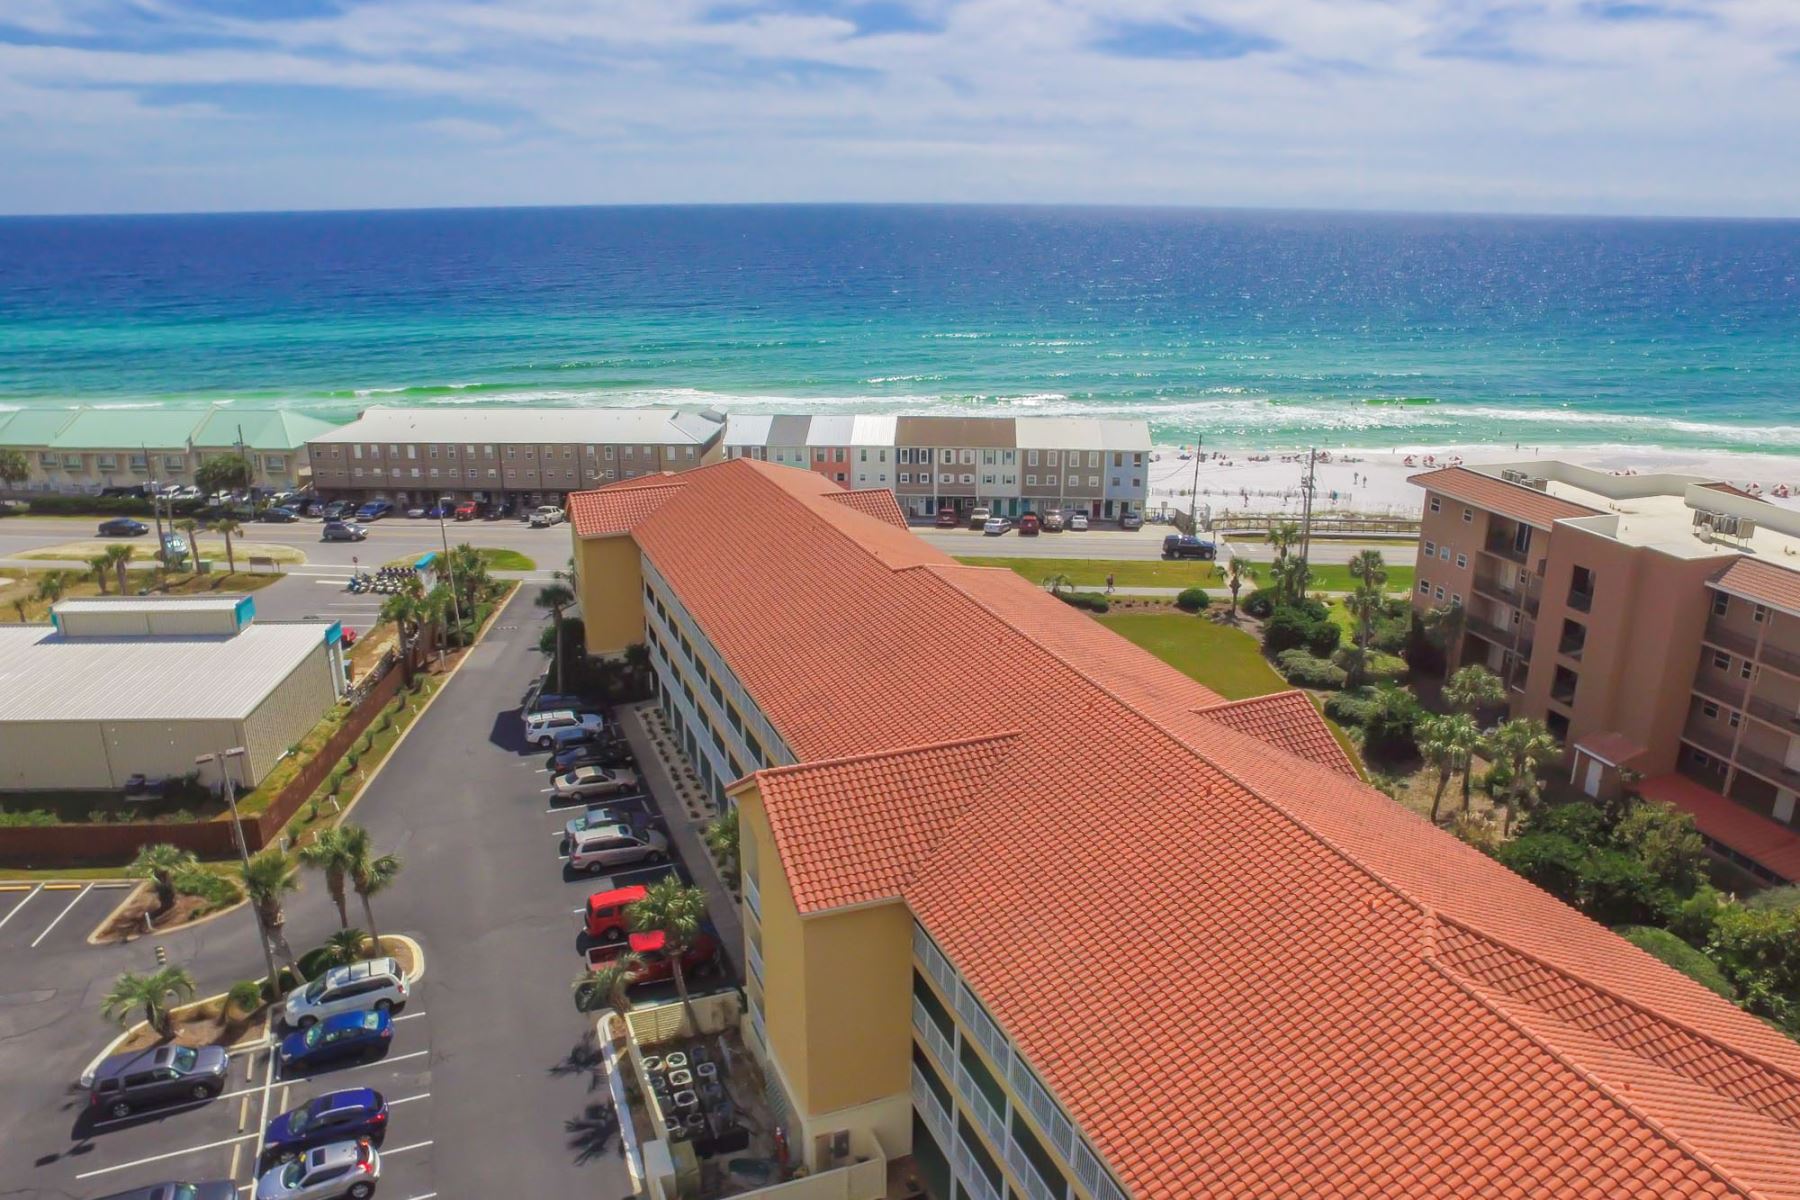 You'll Be Close to the Beach. Just a Short Walk Over to the Sugar-White Sands of Miramar Beach.